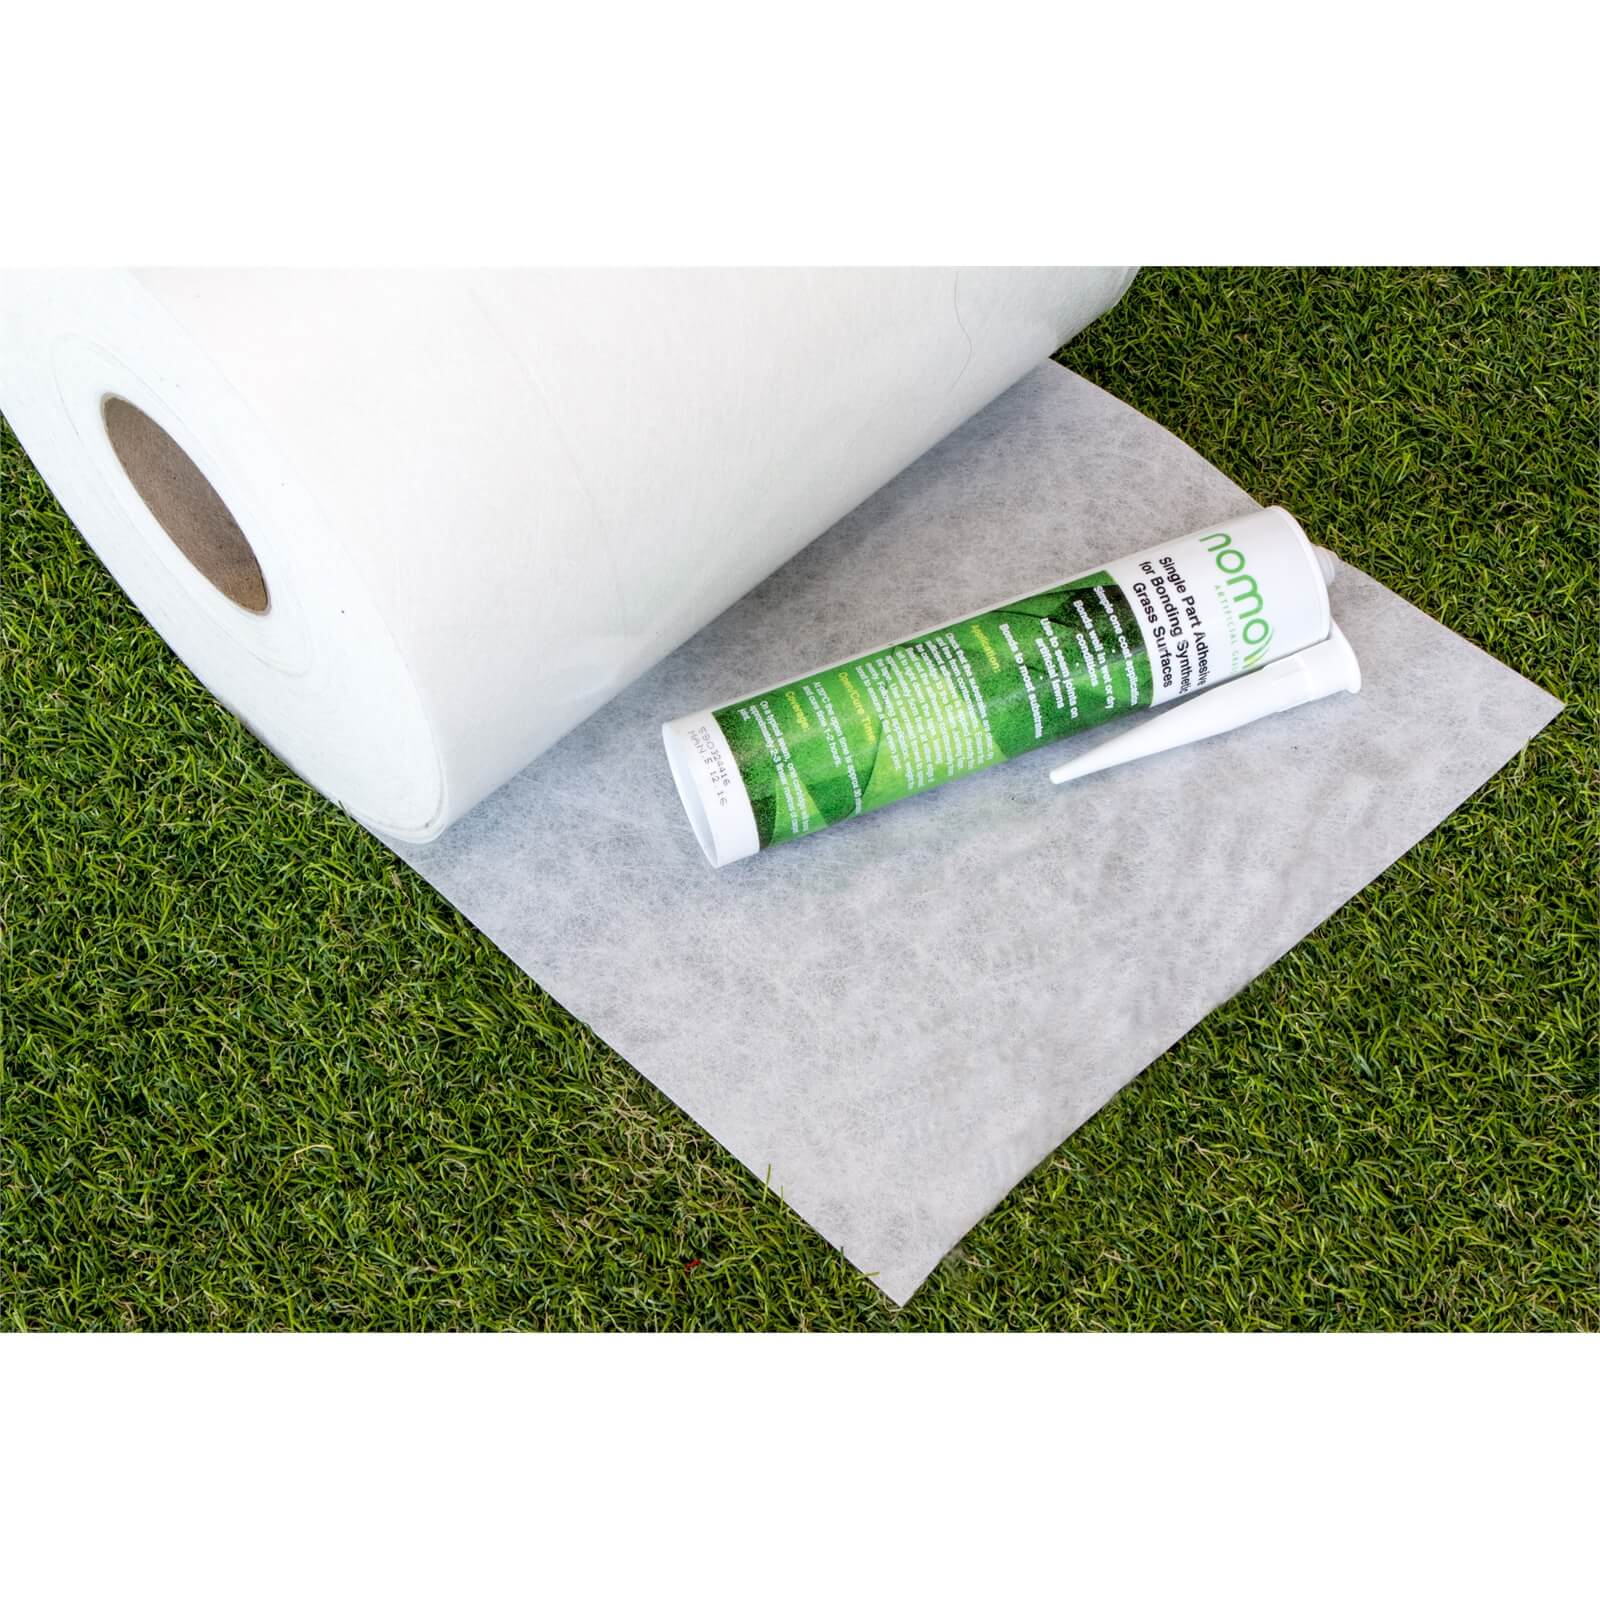 Nomow Joining Kits for Artificial Grass - 3m